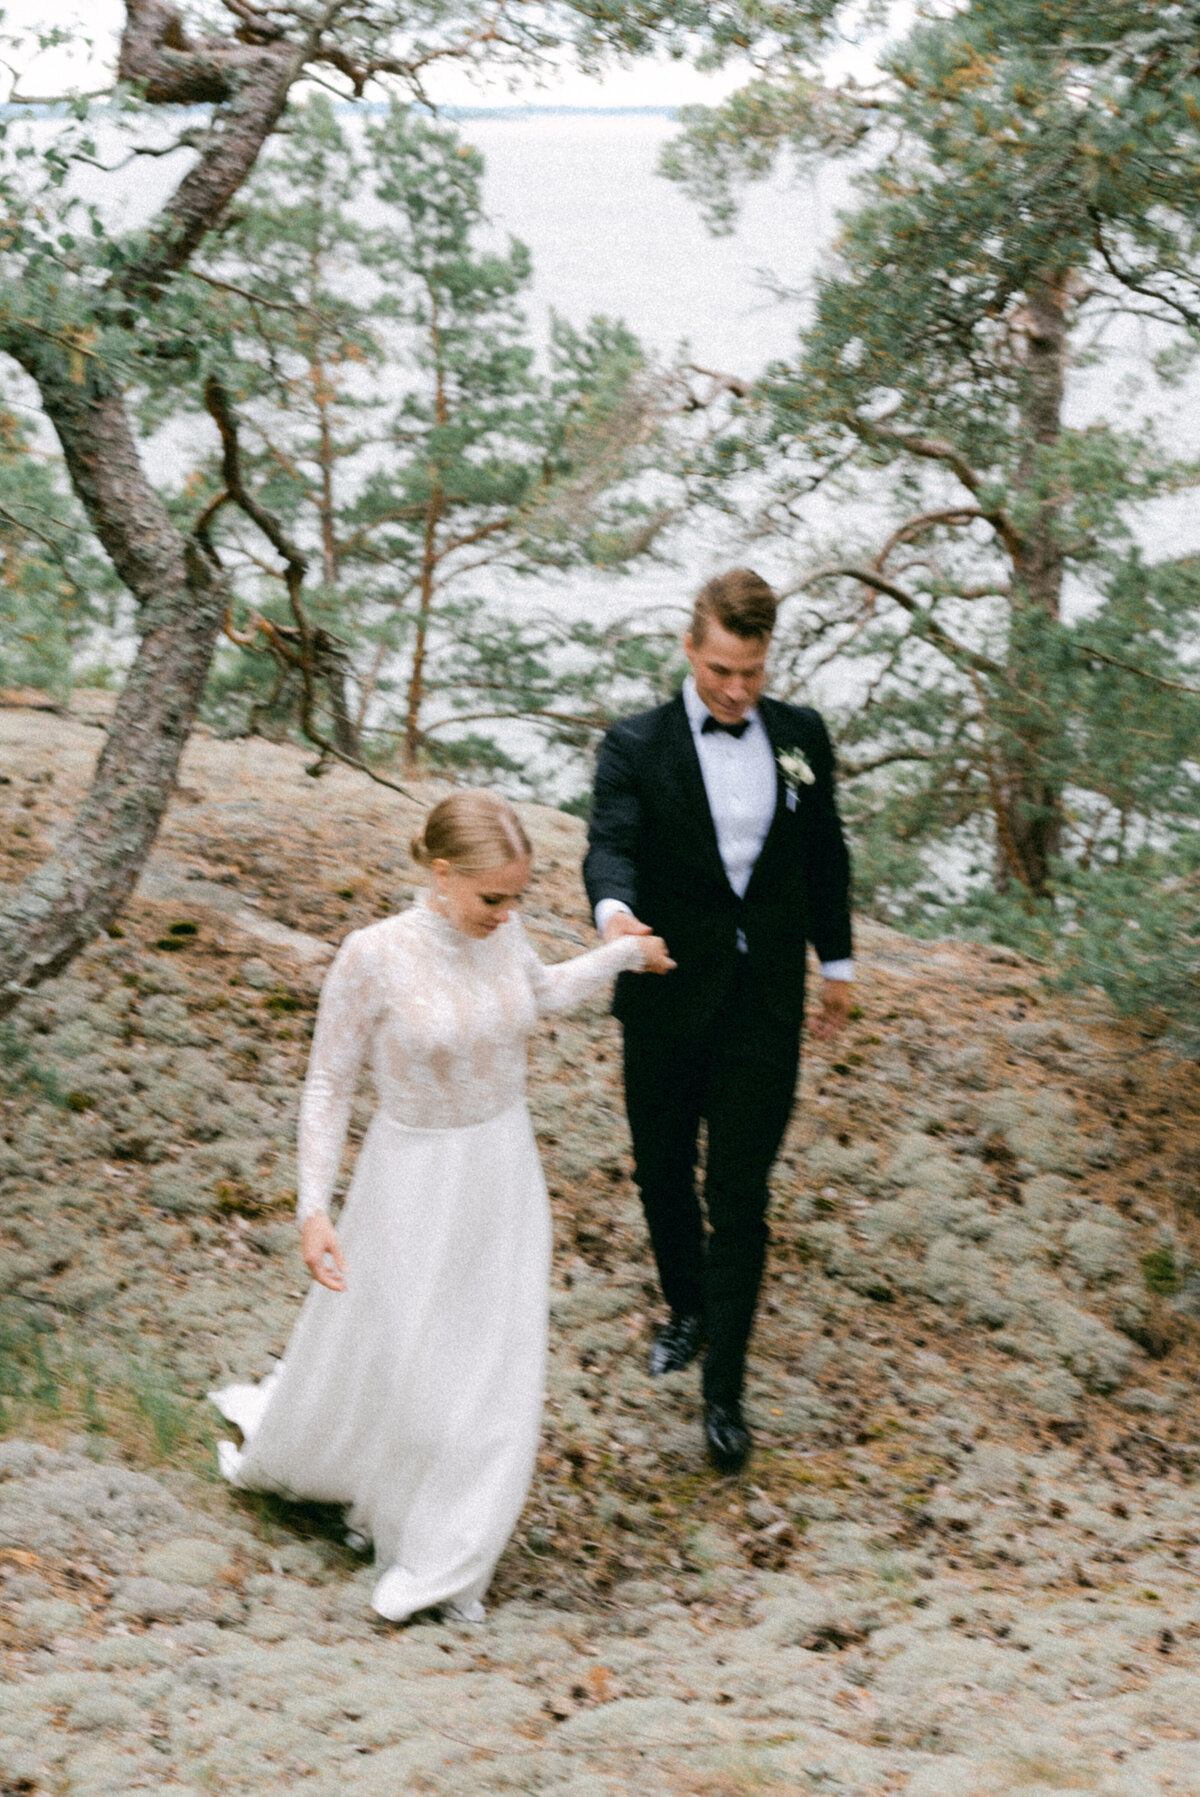 A wedding couple walking in the pine forest by the sea in Turku. A wedding photo captured by Finnish photographer Hannika Gabrielsson.